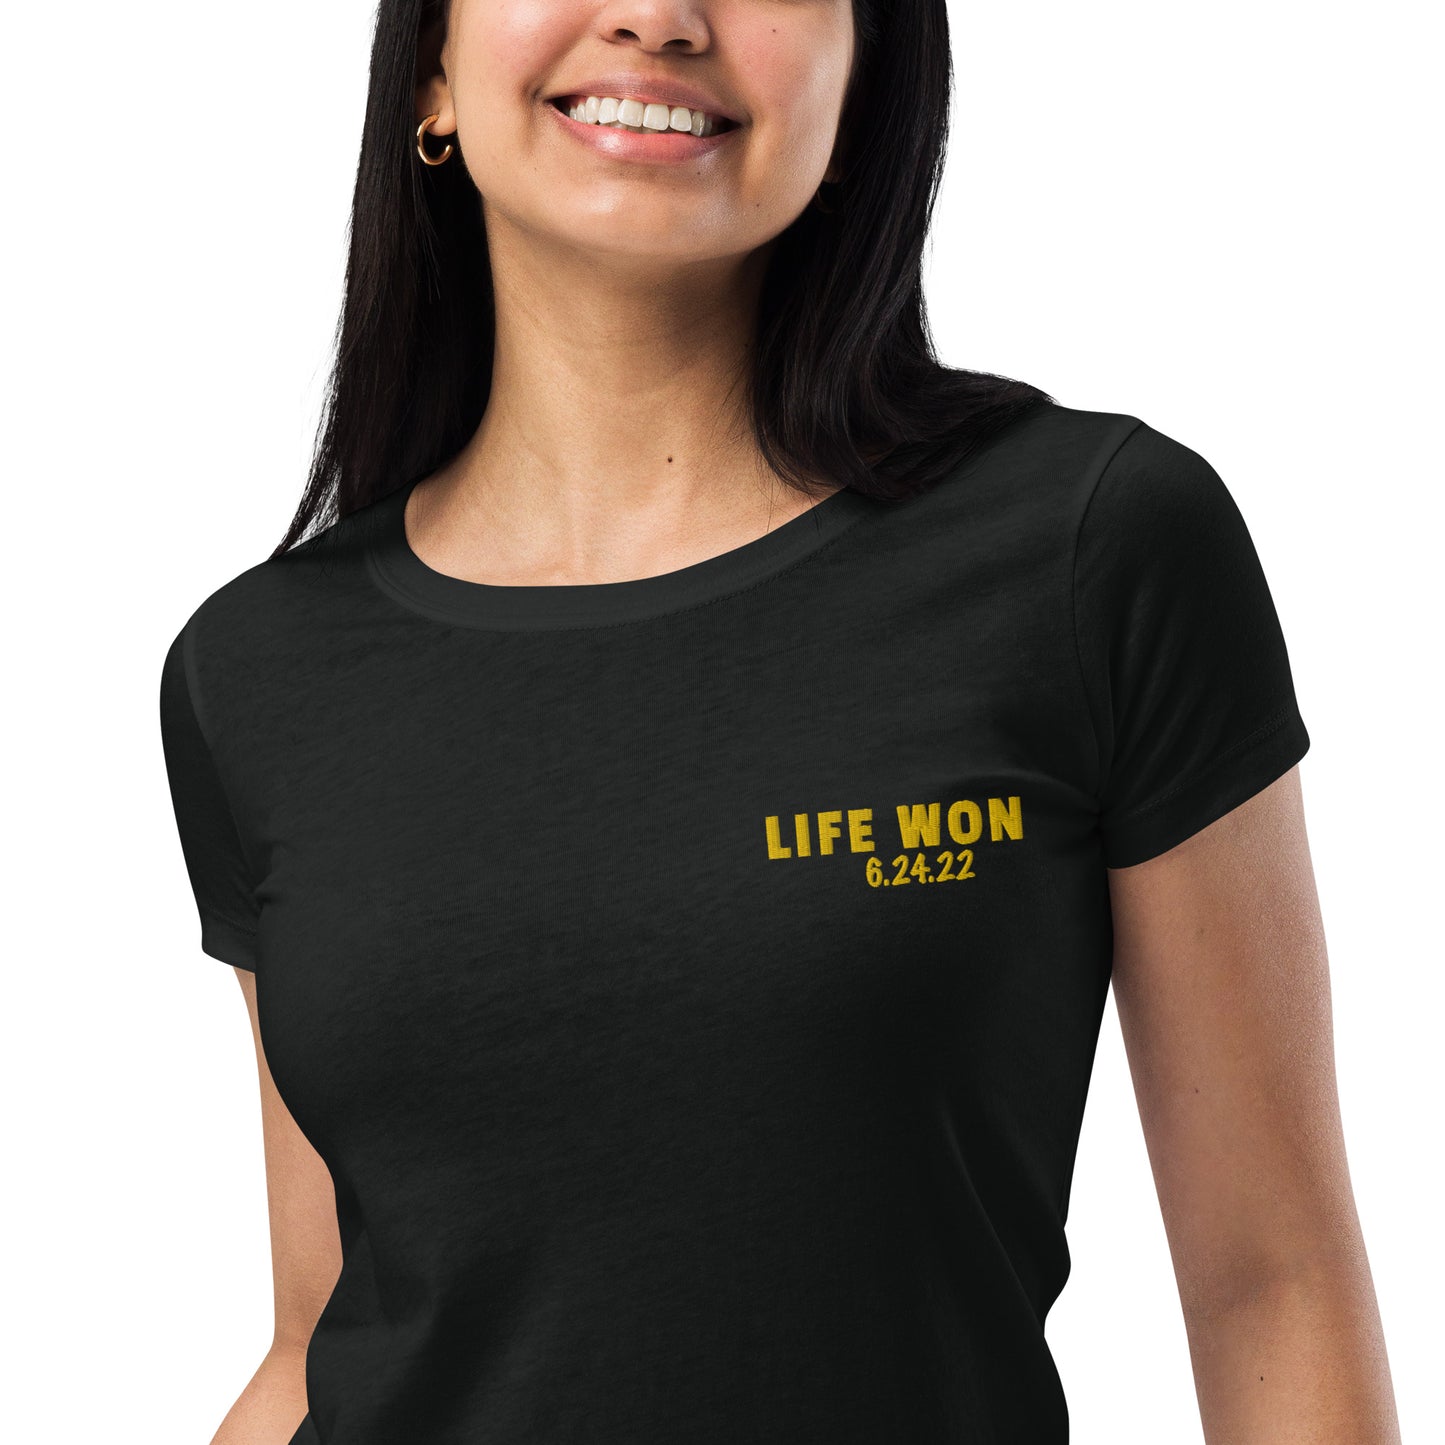 Life Won 6.24.22 Embroidered Women’s fitted t-shirt-Ladies T-Shirt-PureDesignTees